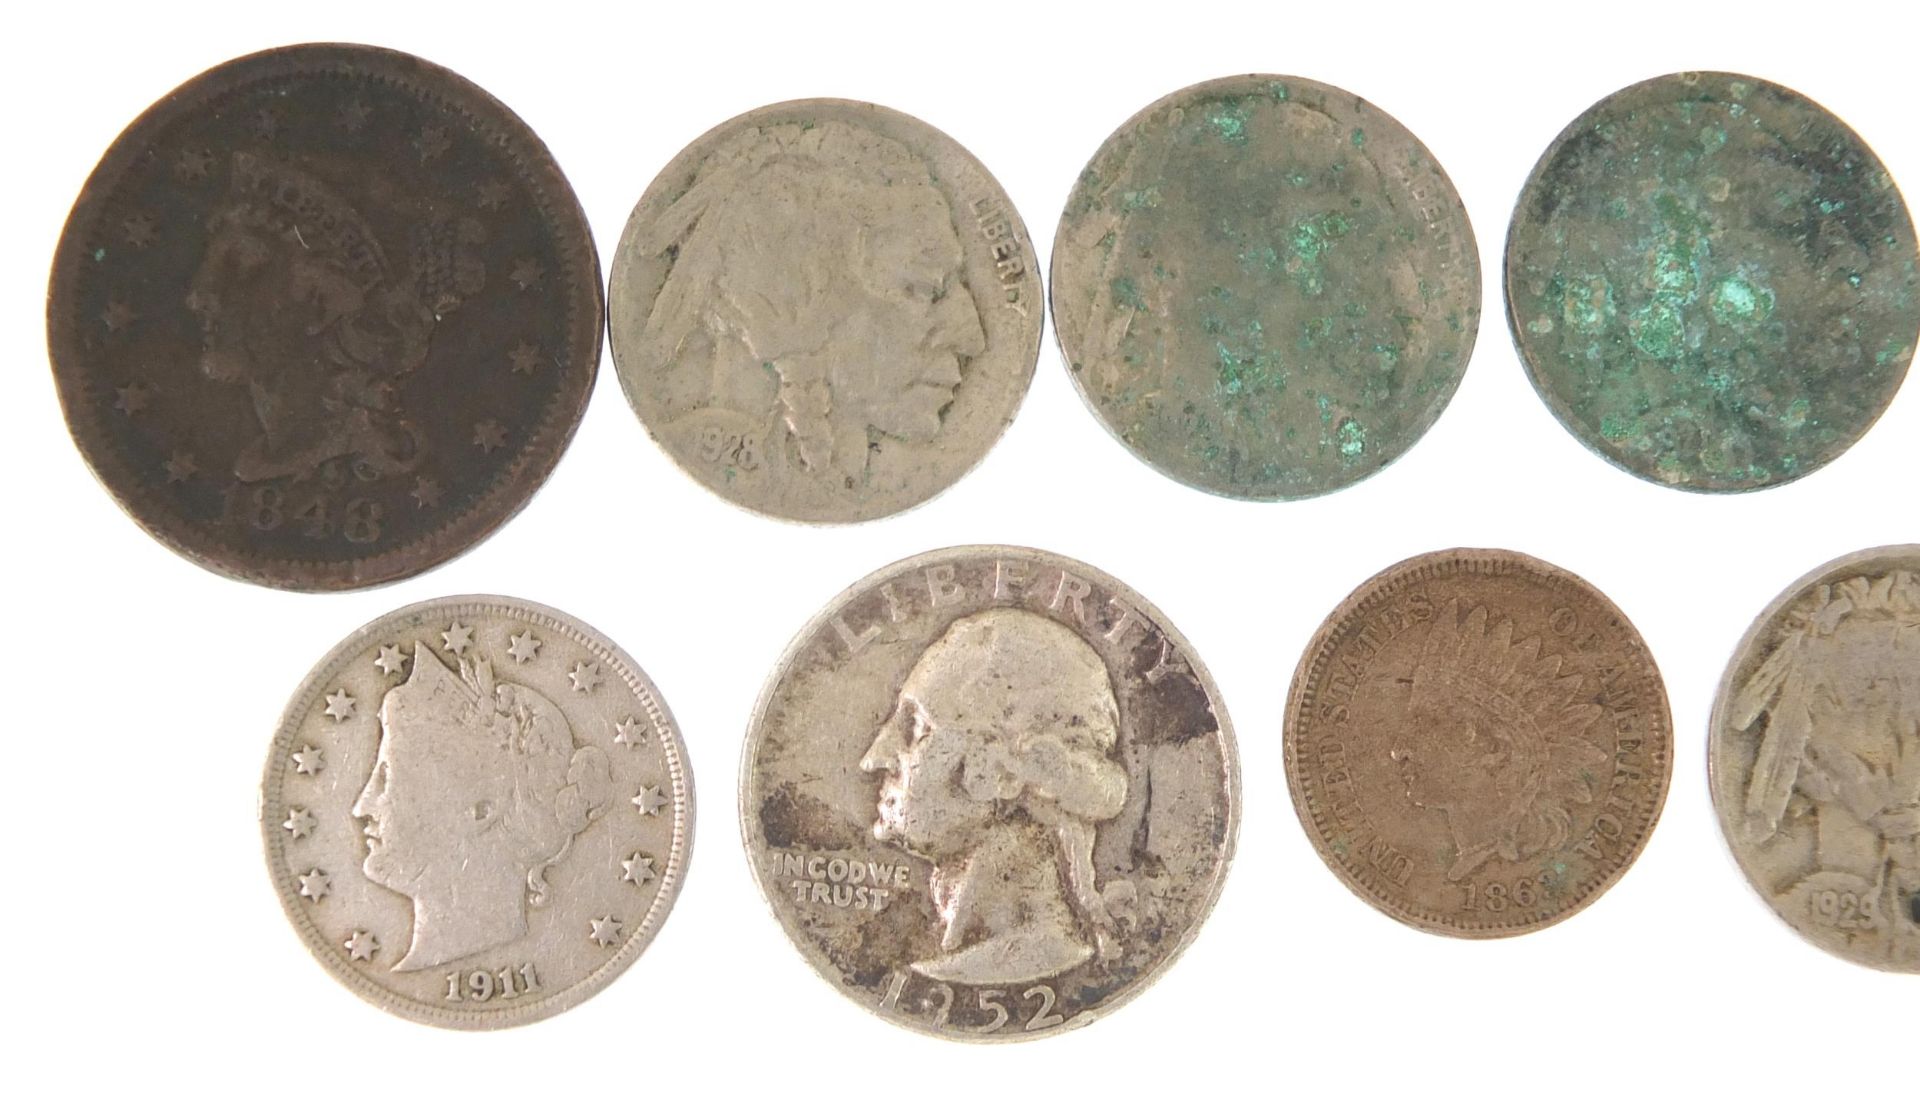 19th century and later American coinage including 1848 one cent and 1863 one cent - Image 2 of 3